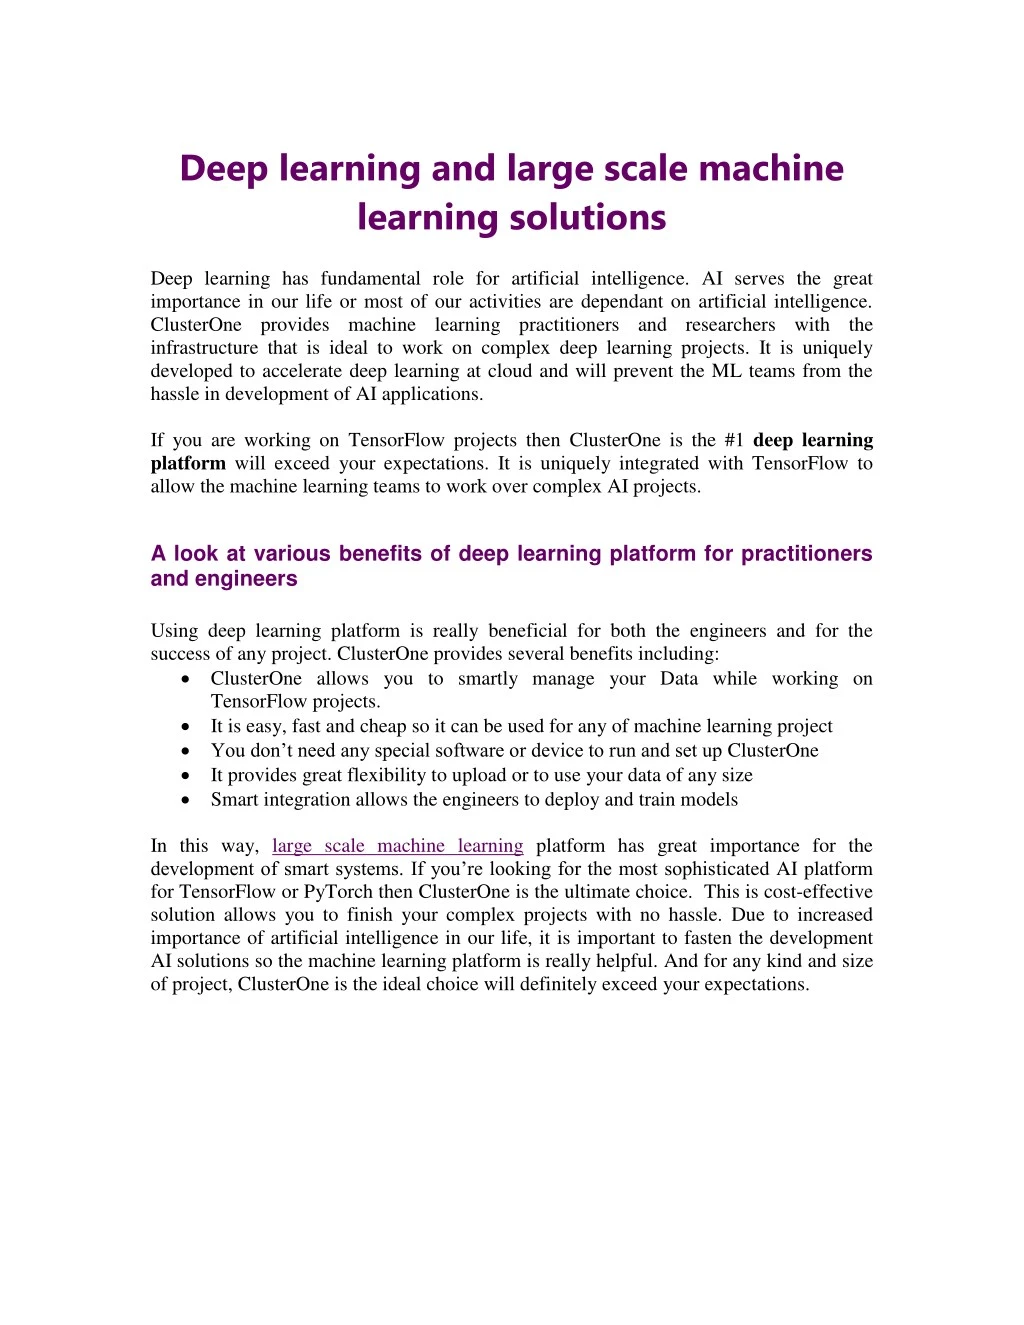 deep learning and large scale machine learning